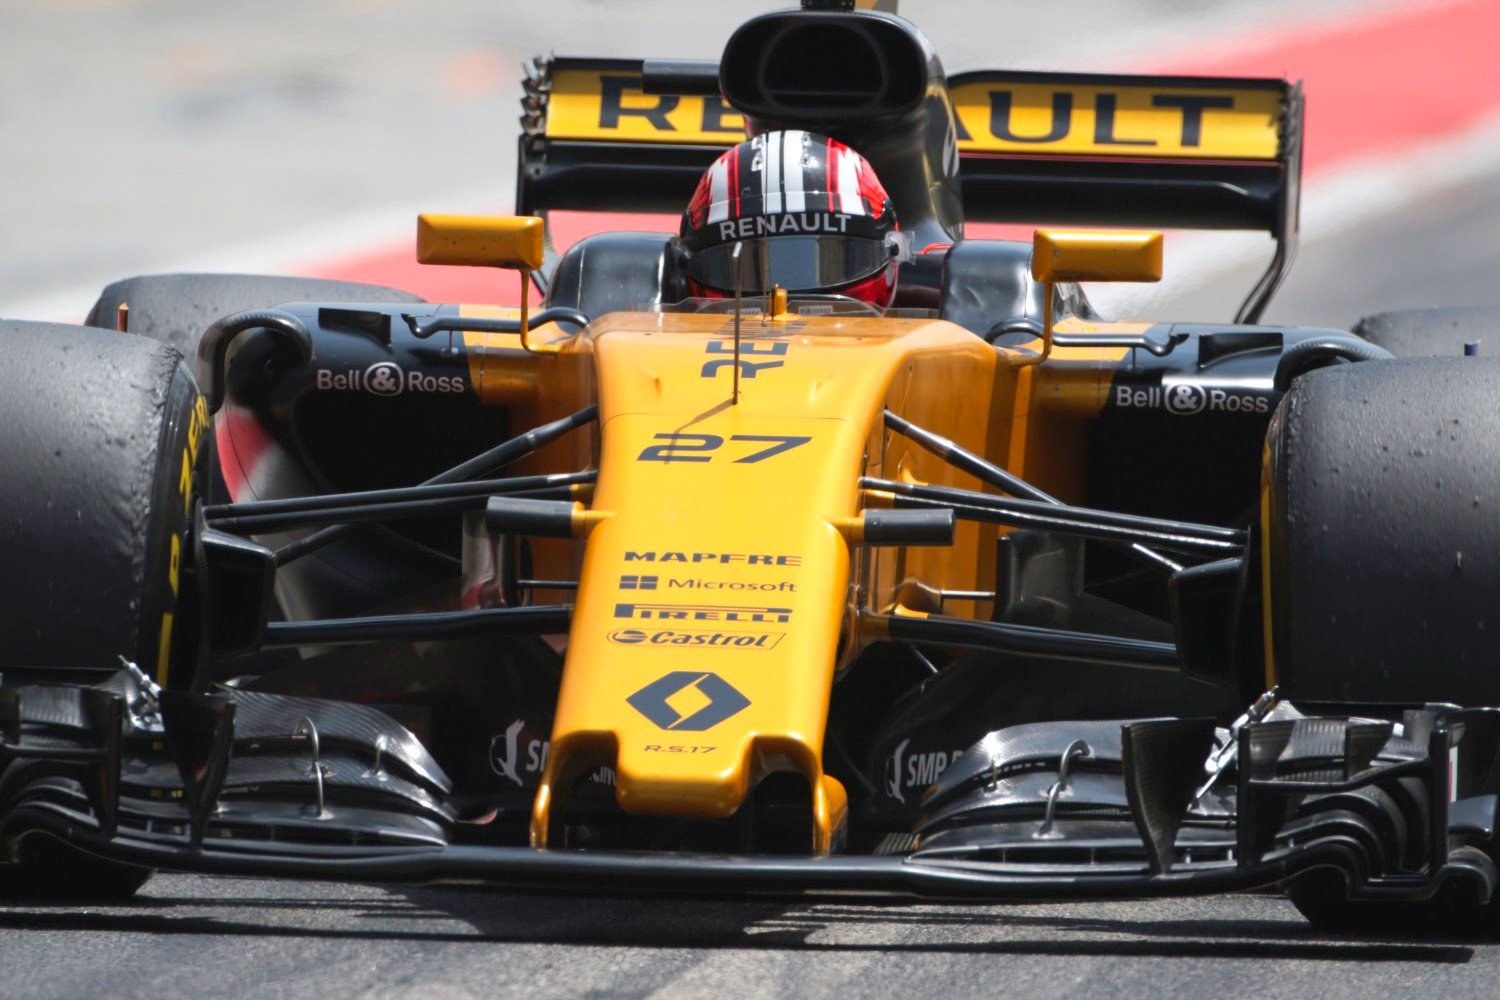 Renault coming on strong